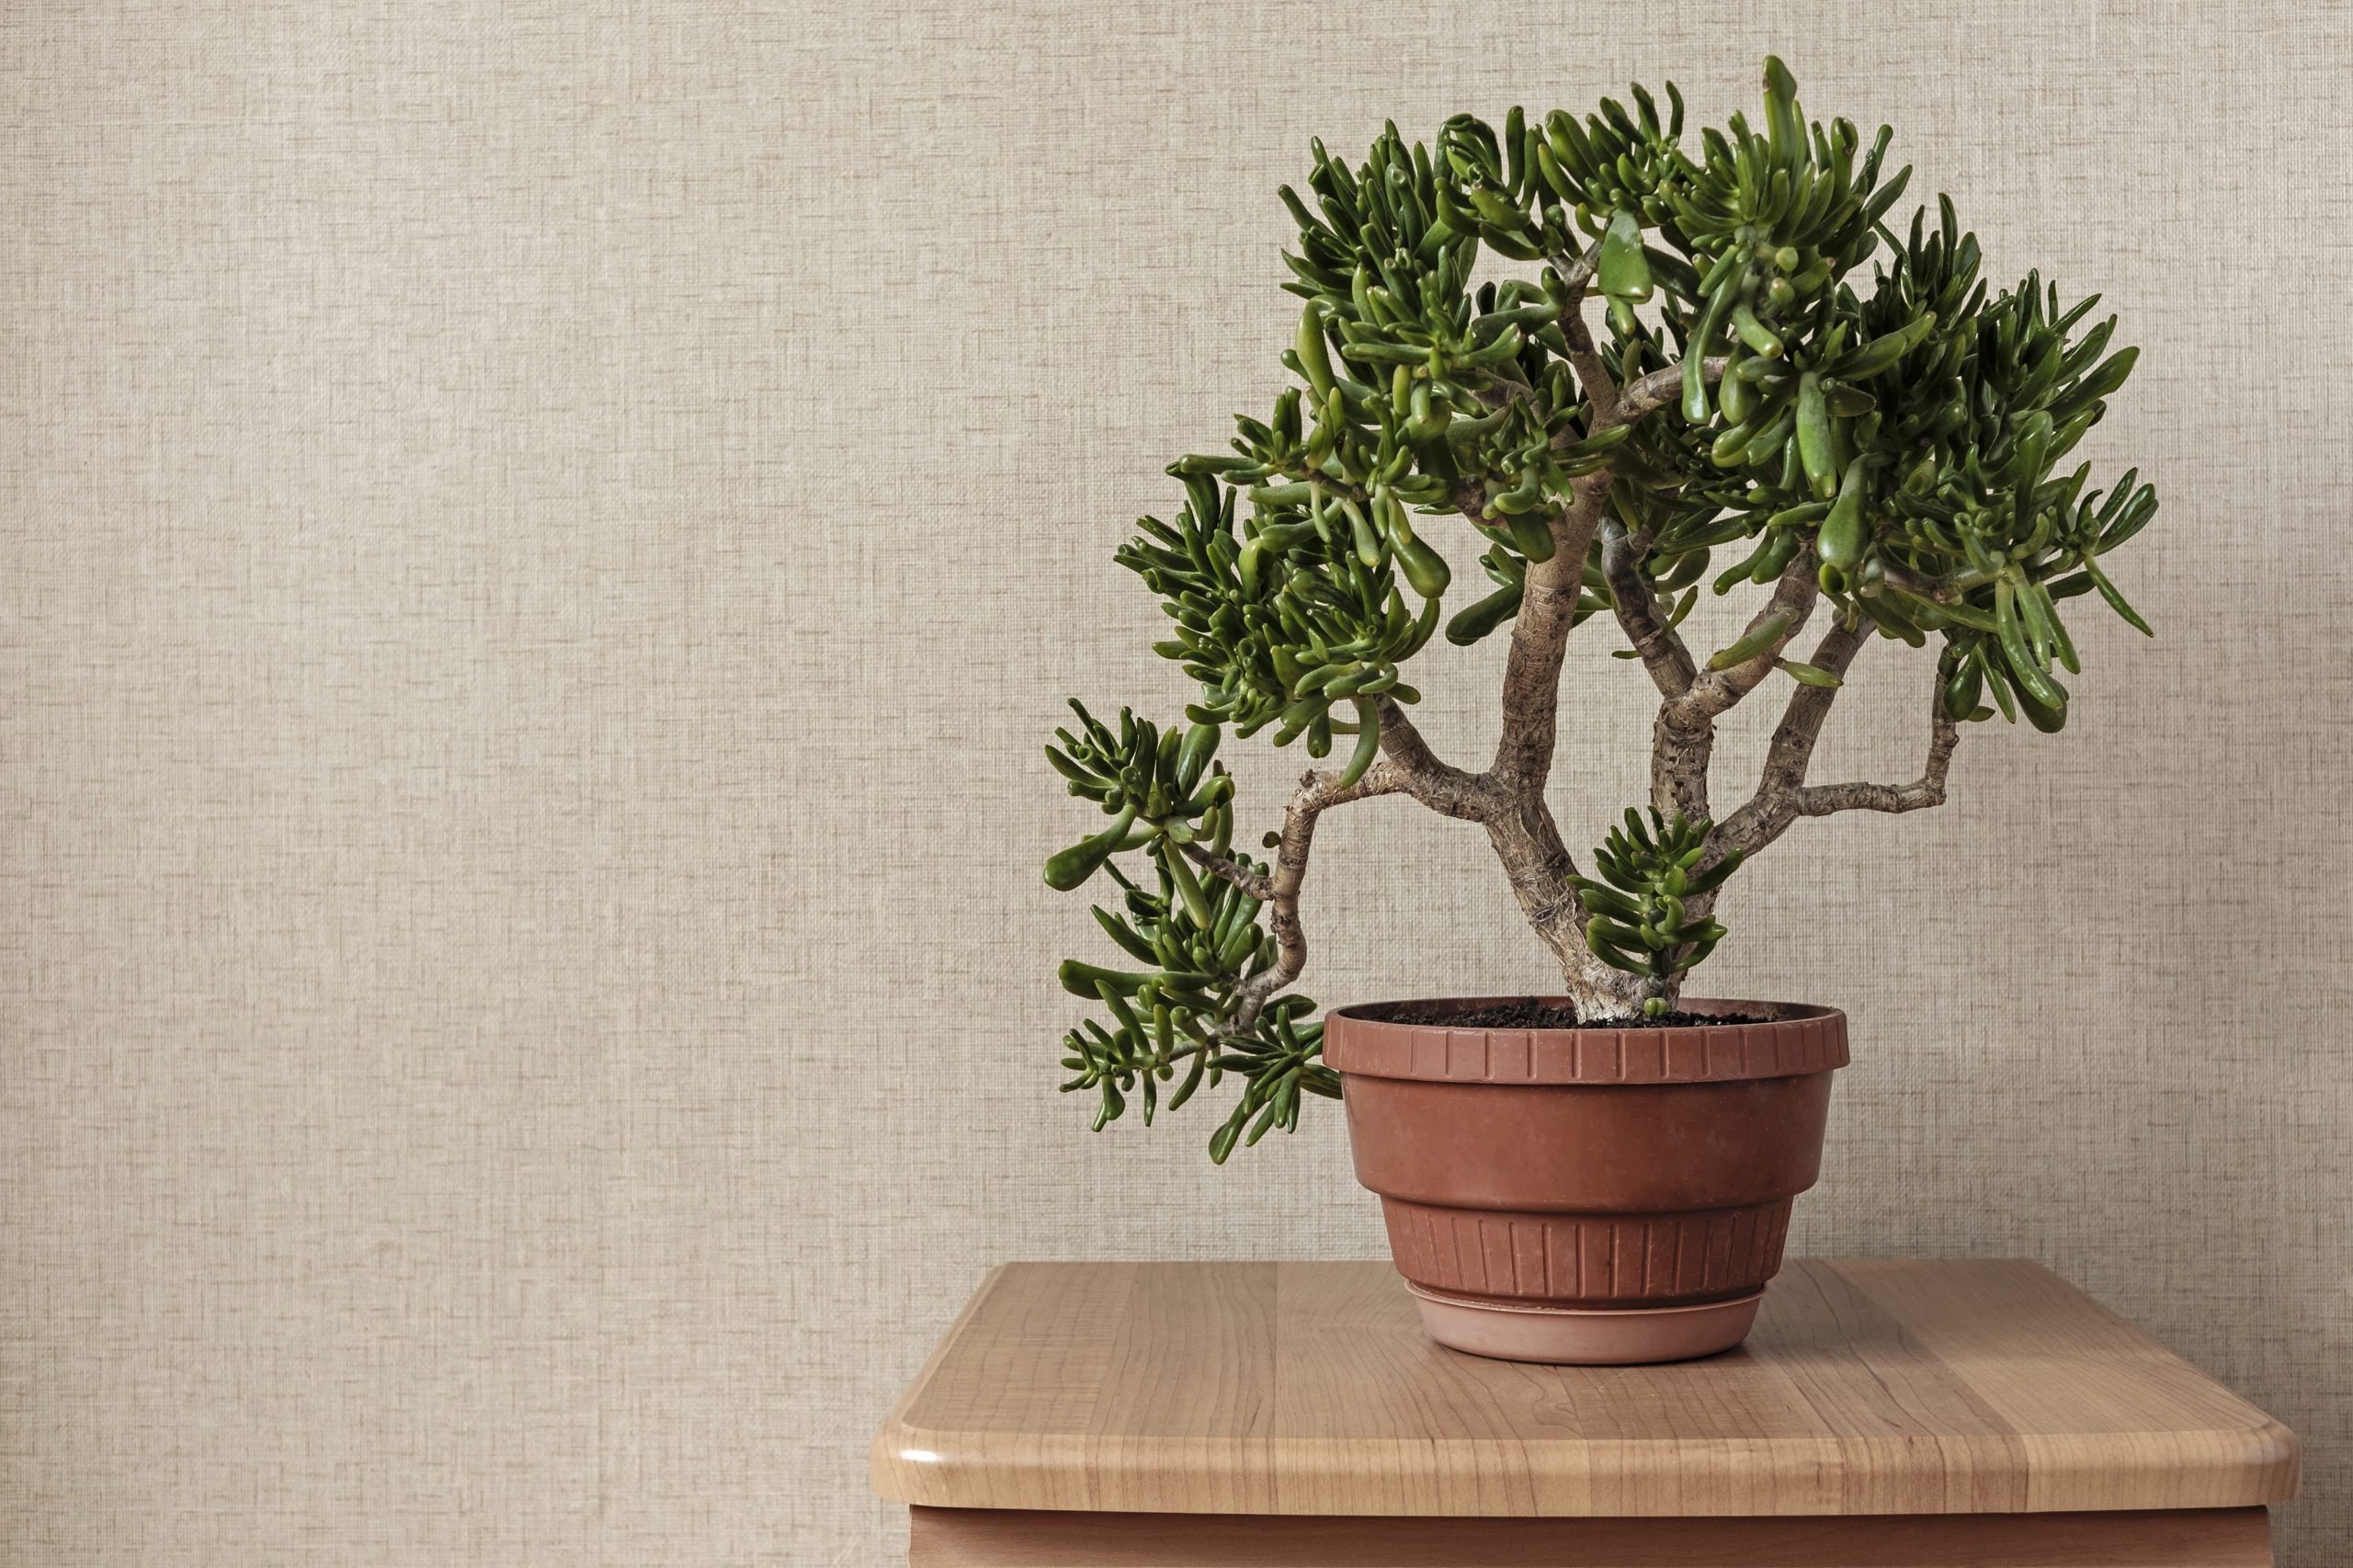  How To Make A Bonsai Tree From A Branch in the world The ultimate guide 